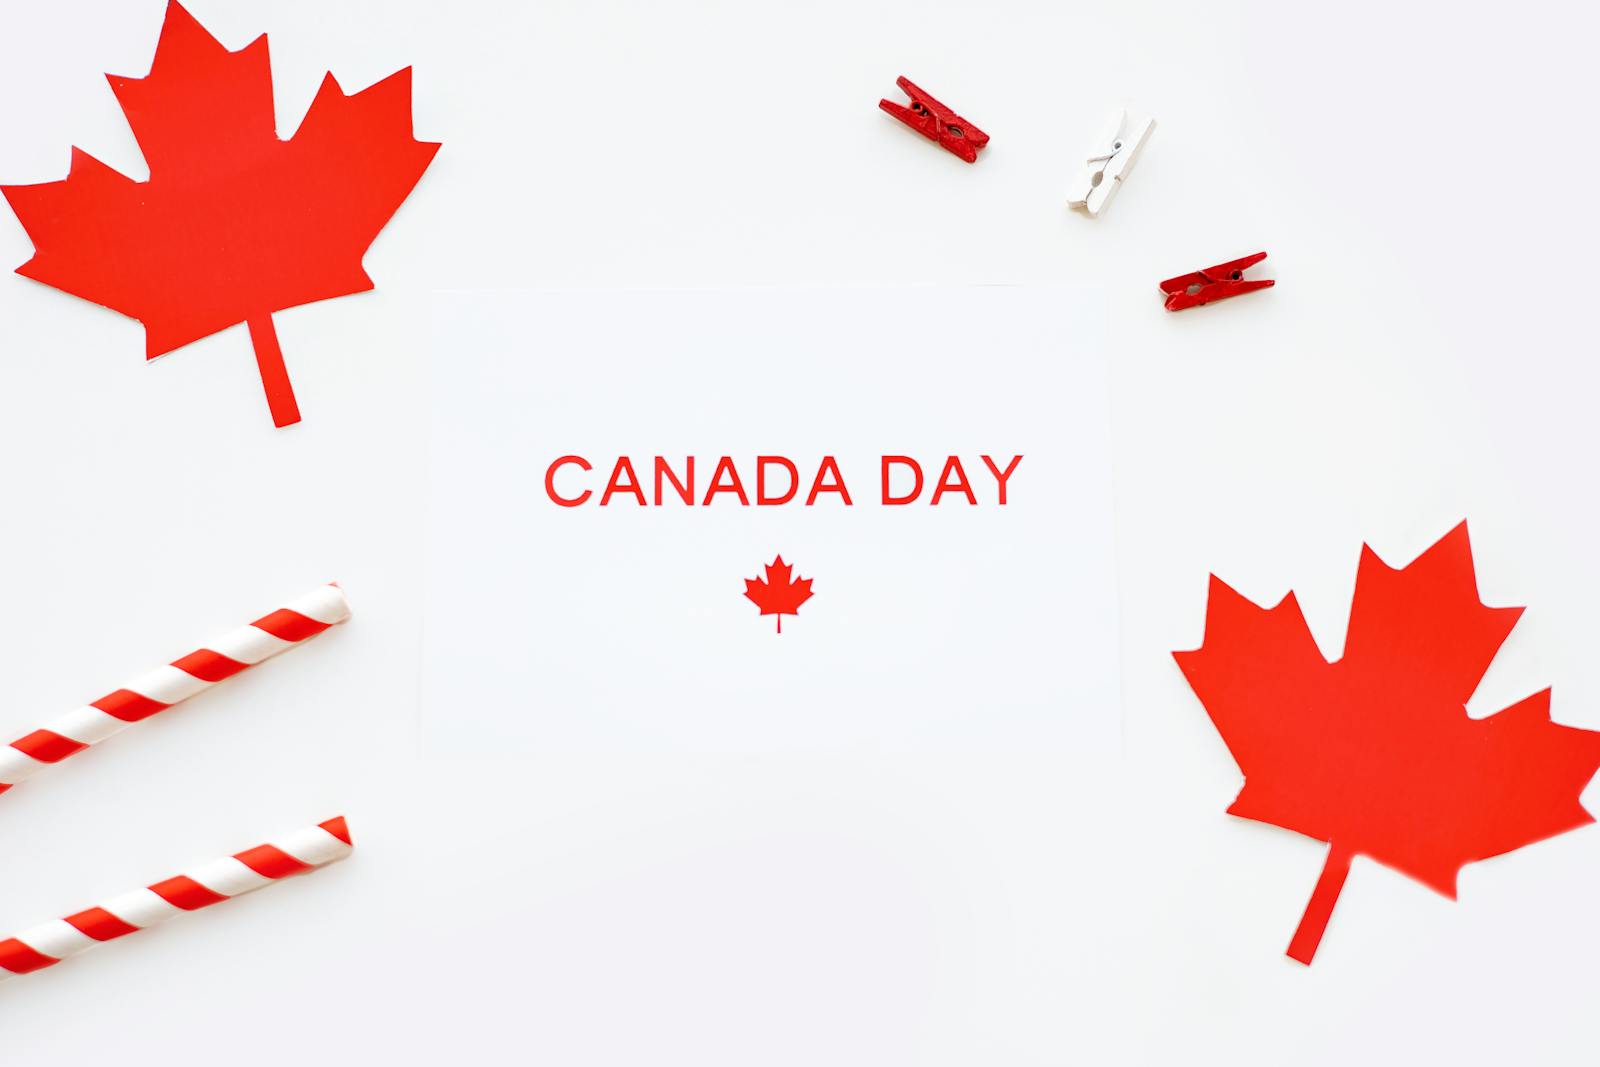 Happy 150th Canada Day from all of us at the Bettina Reid Group